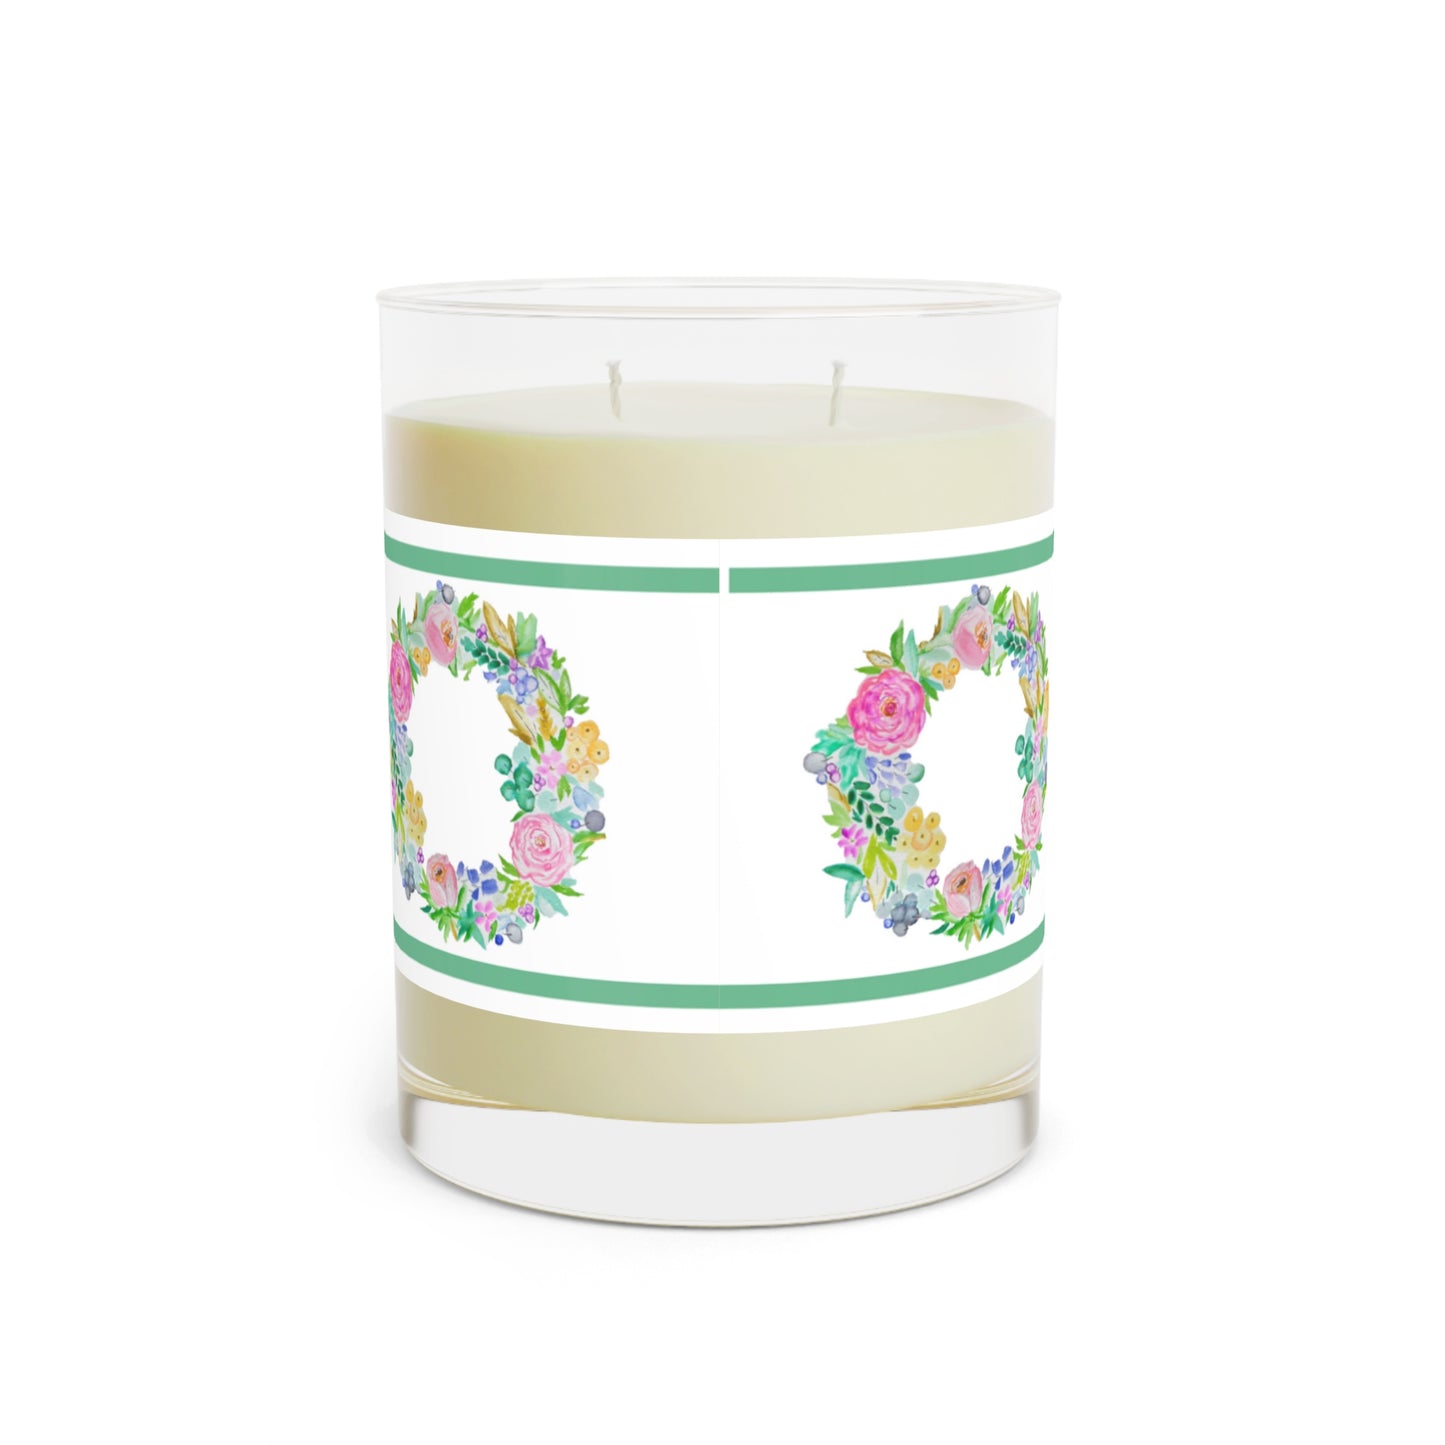 Wing Light Art Designs First Mother's Day (Green) Scented Candle - Full Glass, 11oz